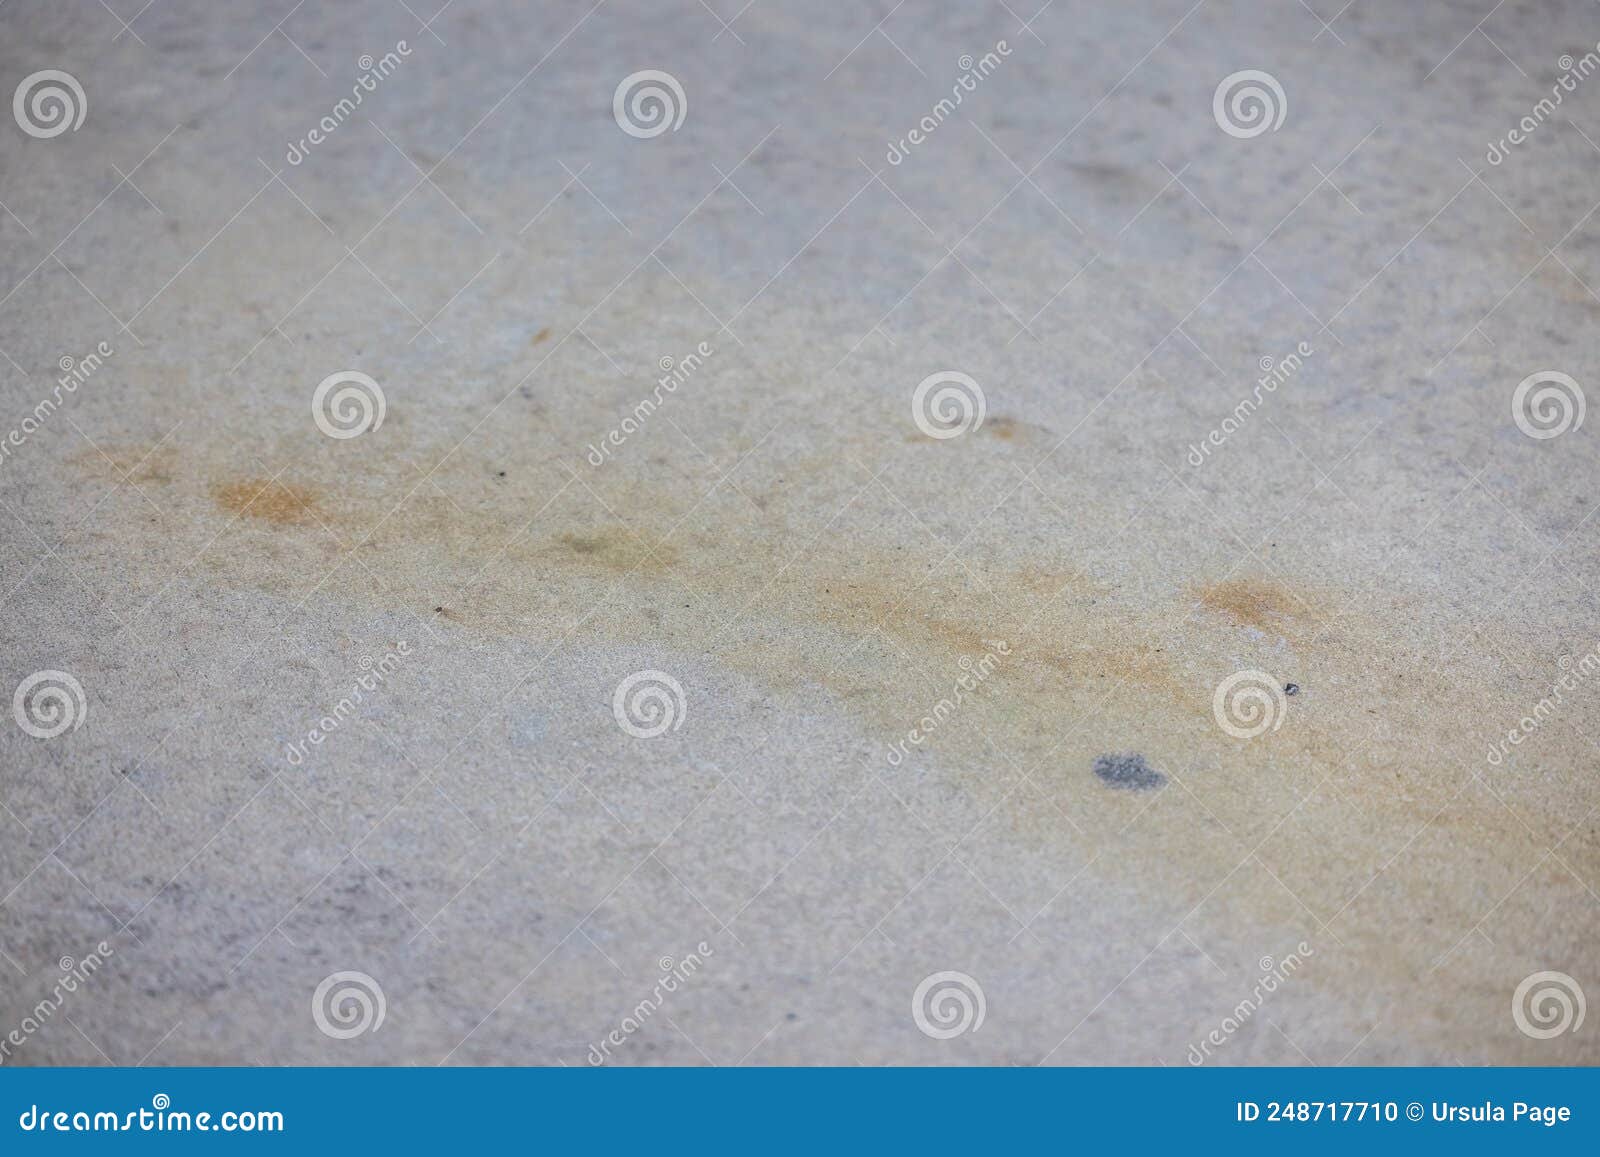 Dirty Rust and Dirt Stains on a Concrete Driveway or Sidewalk that